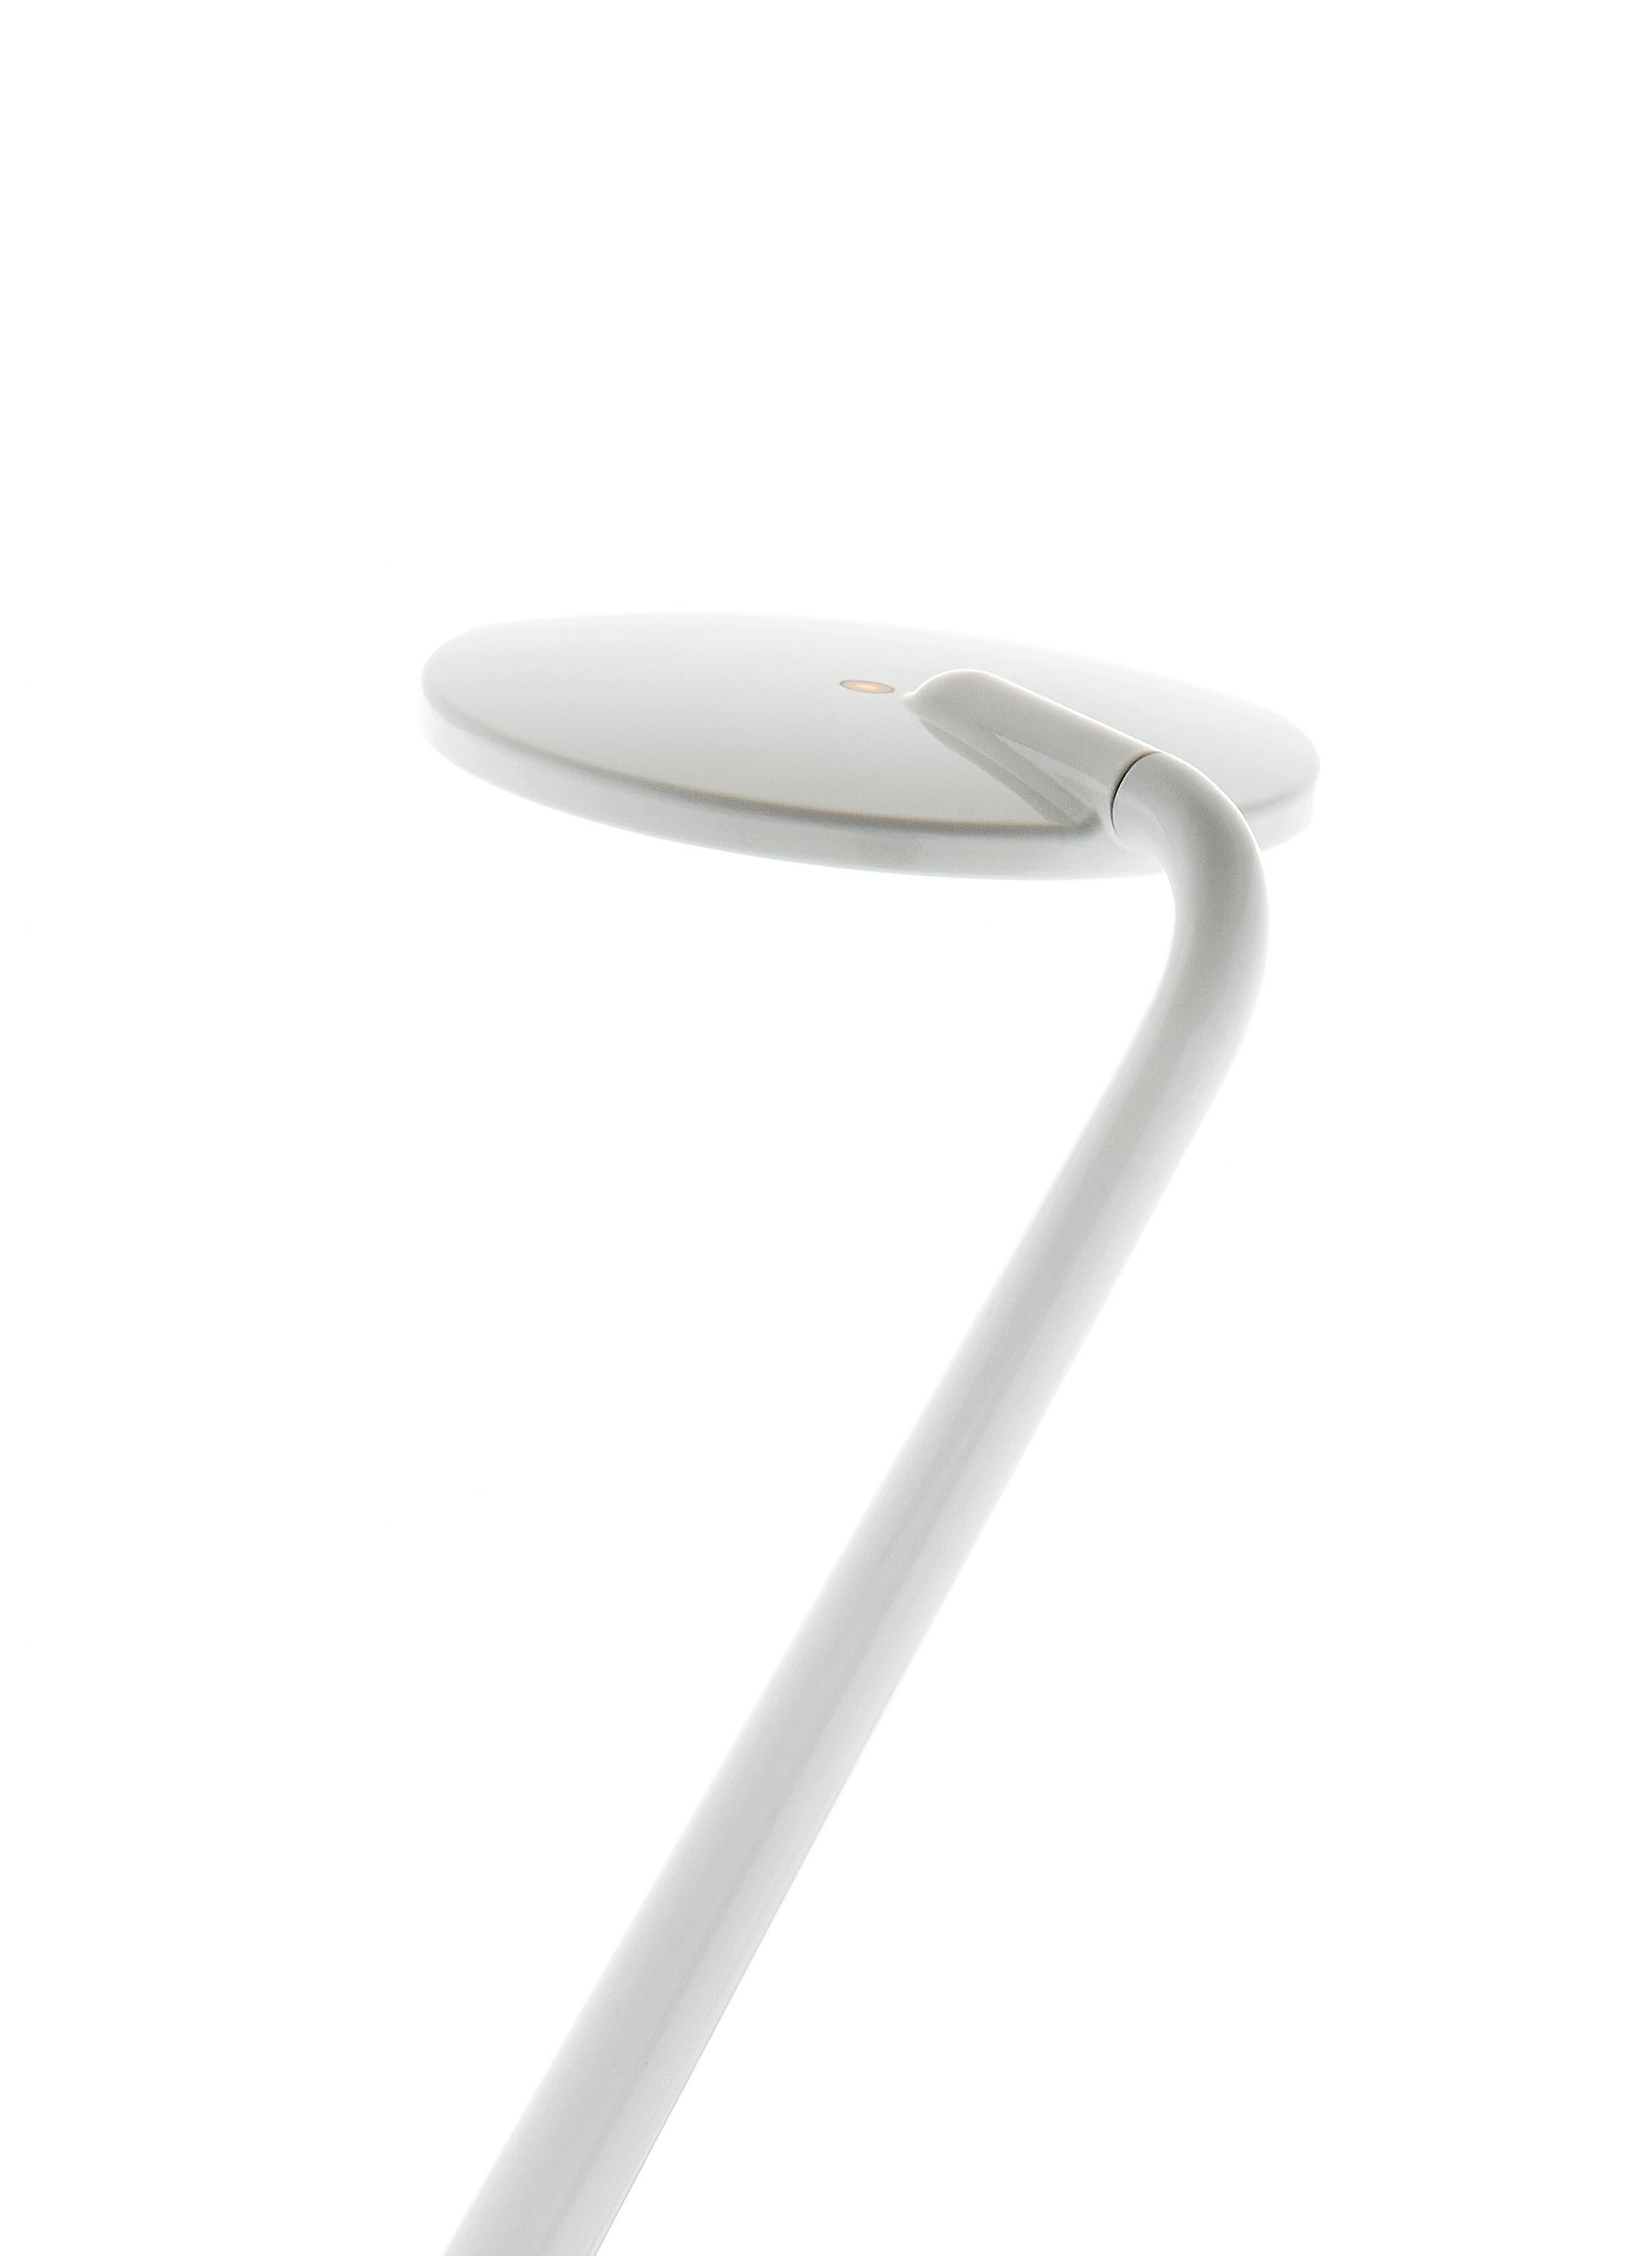 Modern Pixo Optical Table Lamp in White by Pablo Designs For Sale